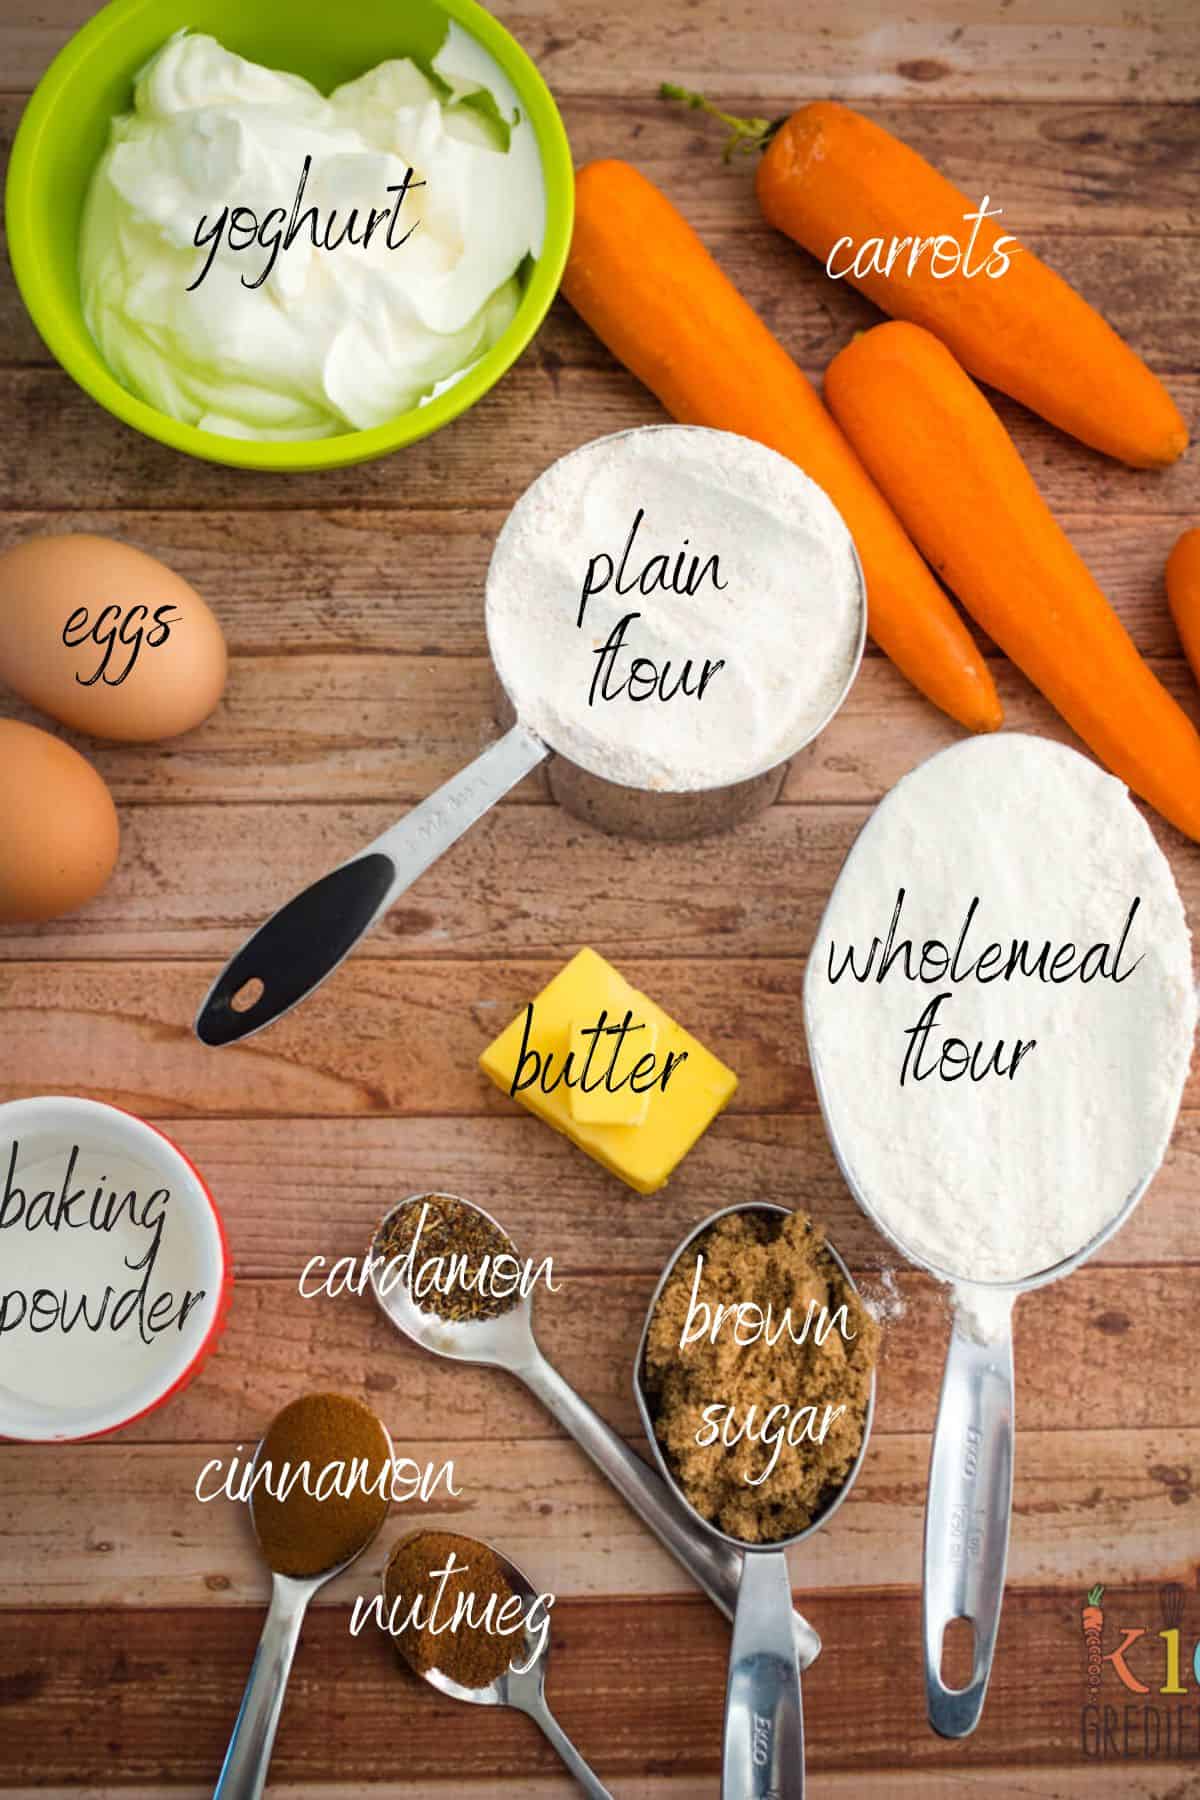 ingredients for carrot and spice muffins, carrots, yoghurt, eggs, flour, spices, butter